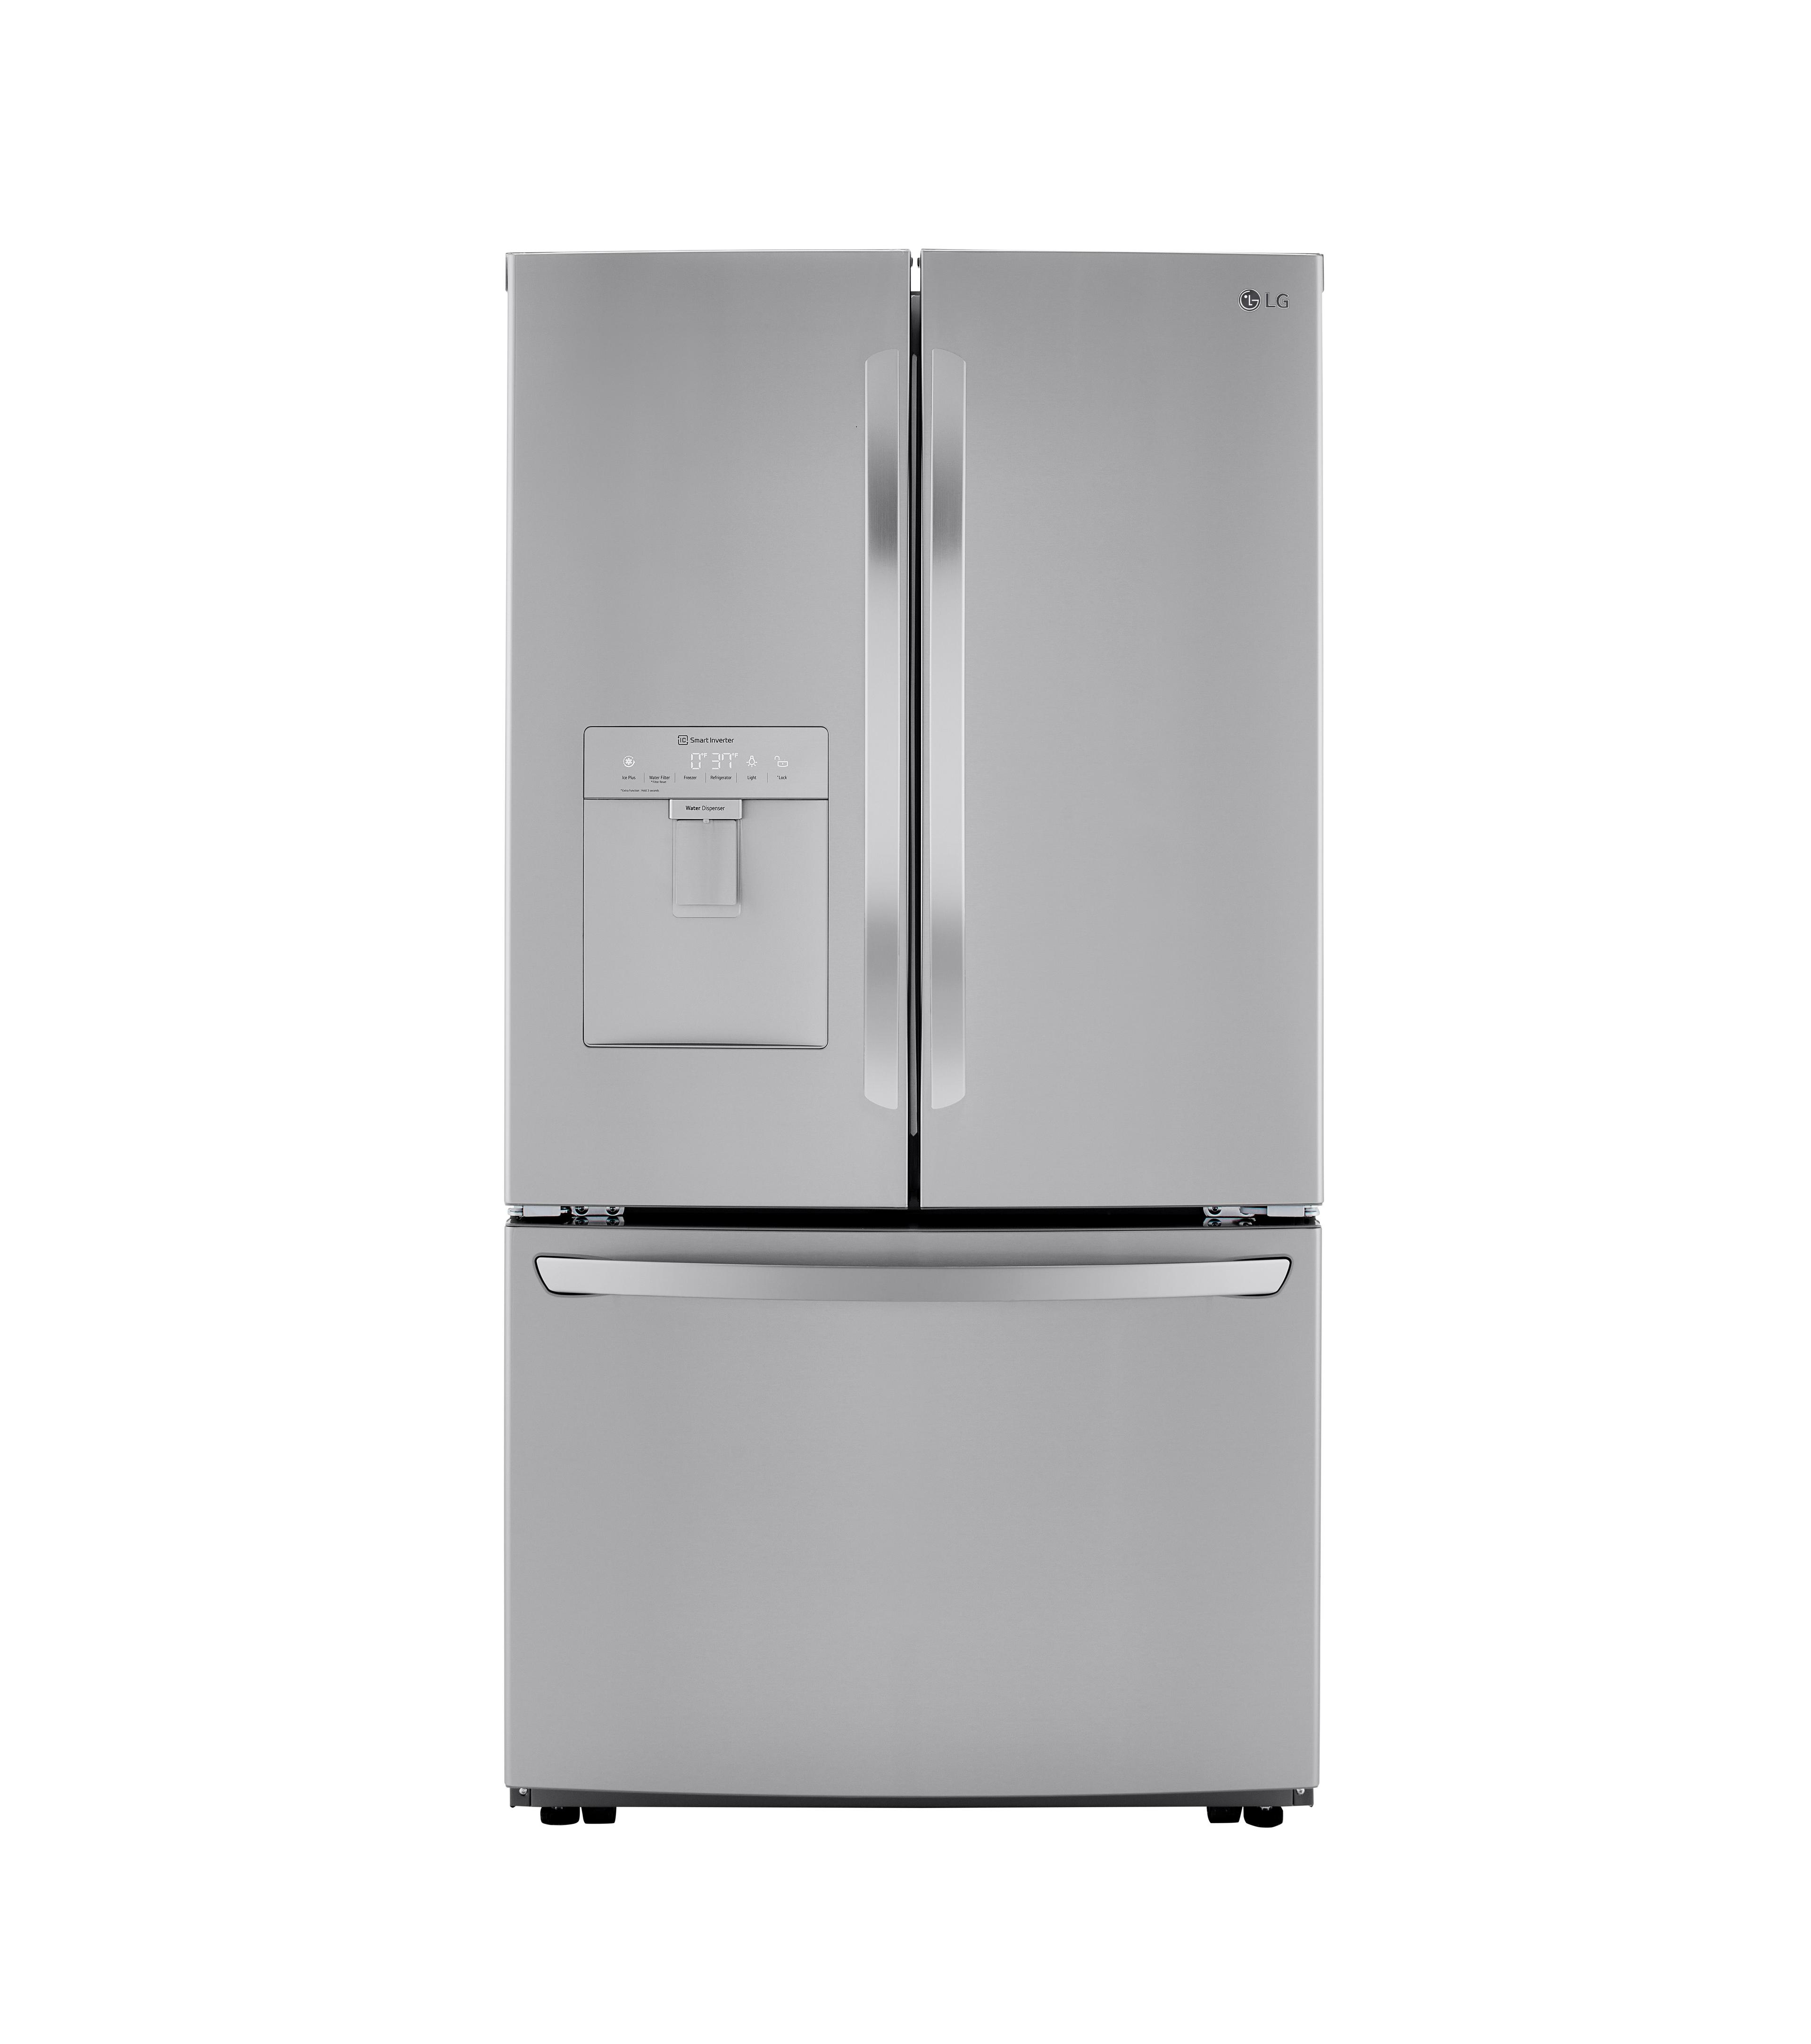 LG LRFWS2906S 29 cu. ft. French Door Refrigerator in Stainless Steel